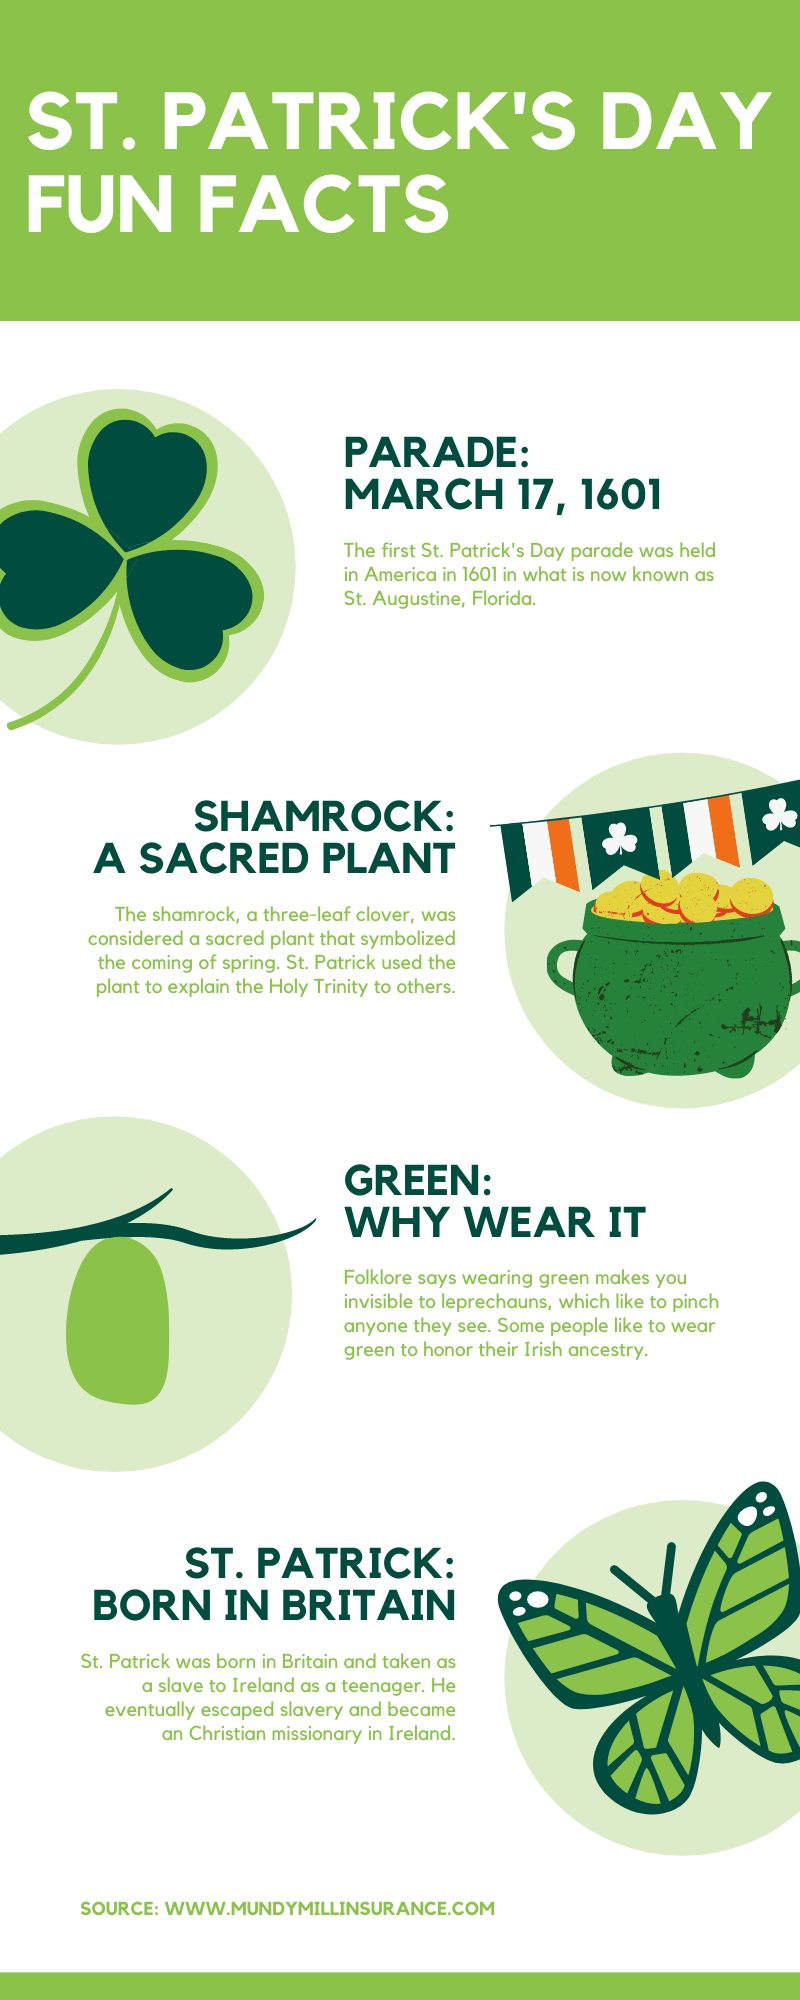 st-patrick-s-day-fun-facts-mundy-mill-premier-insurance